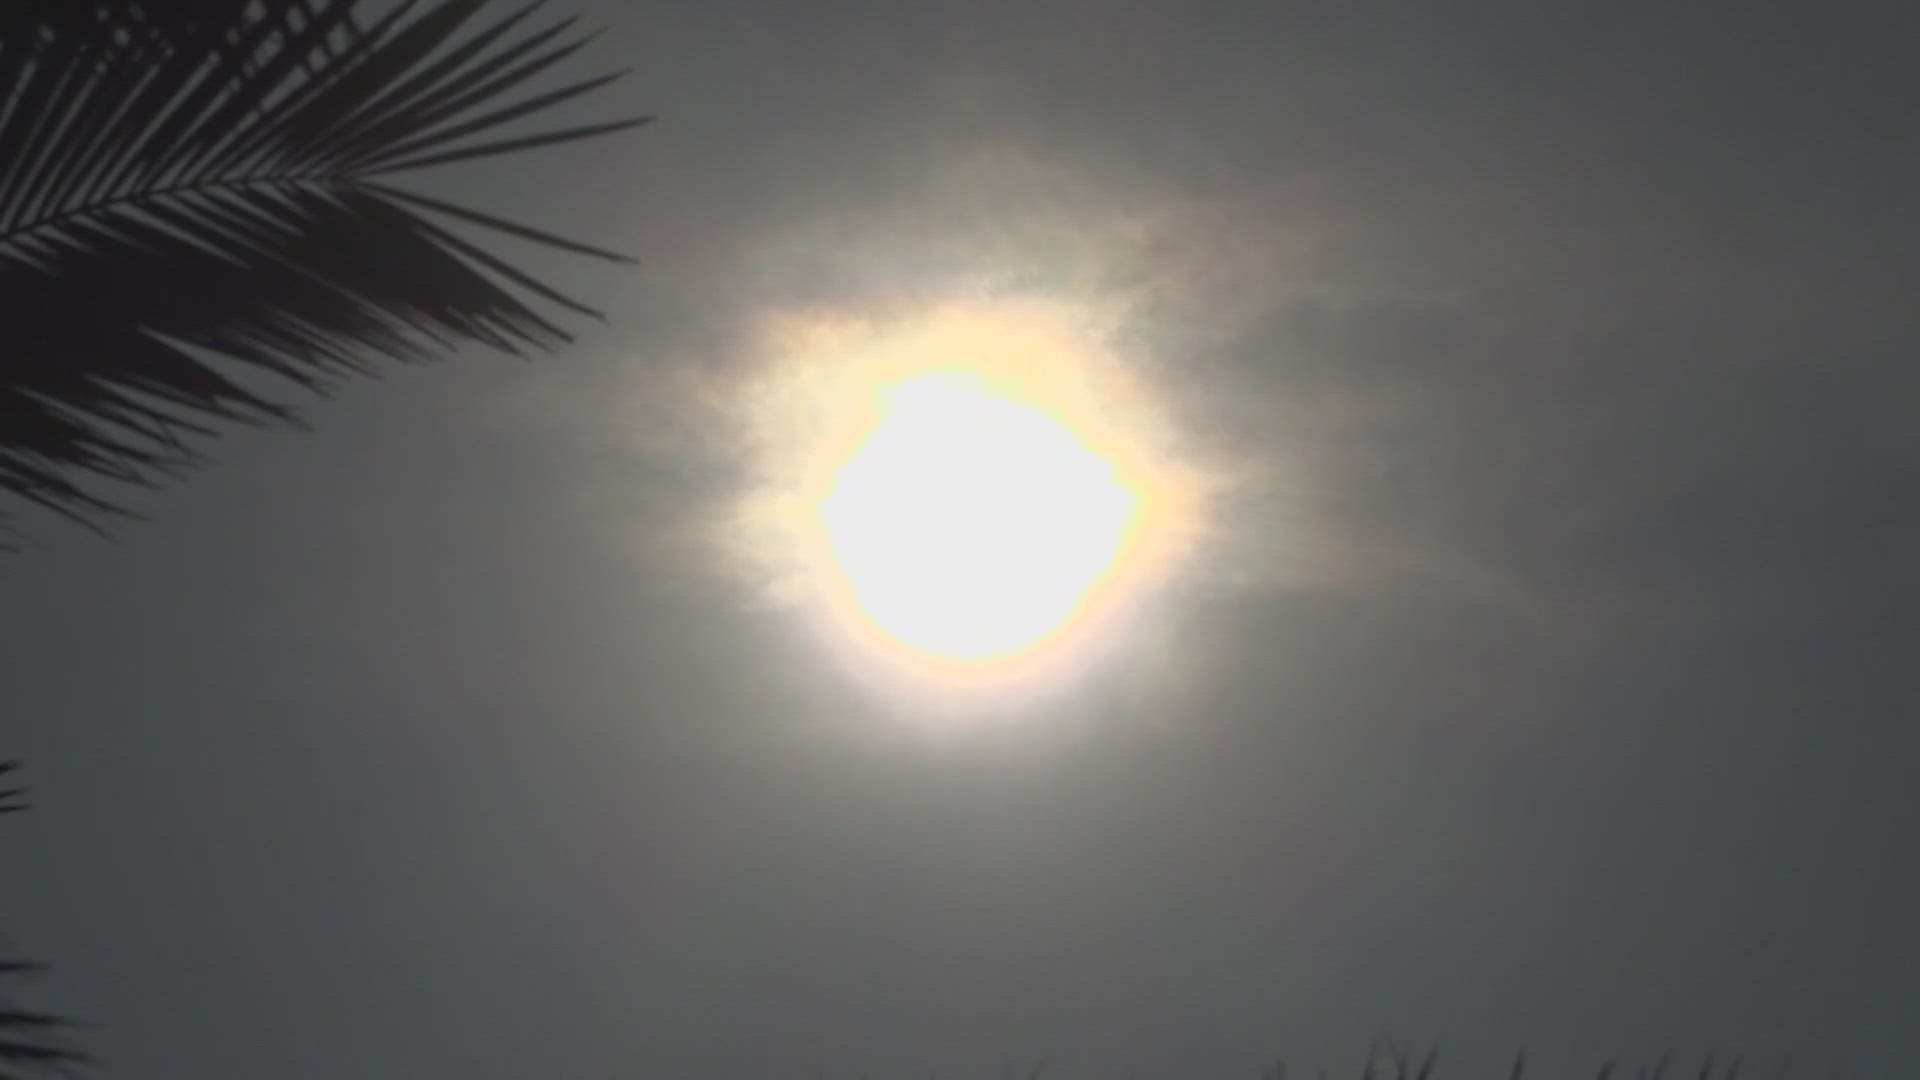 First Coast News reached out to nine different school districts to ask if they have an excessive heat plan. Most districts have guidance on how to keep kids safe.